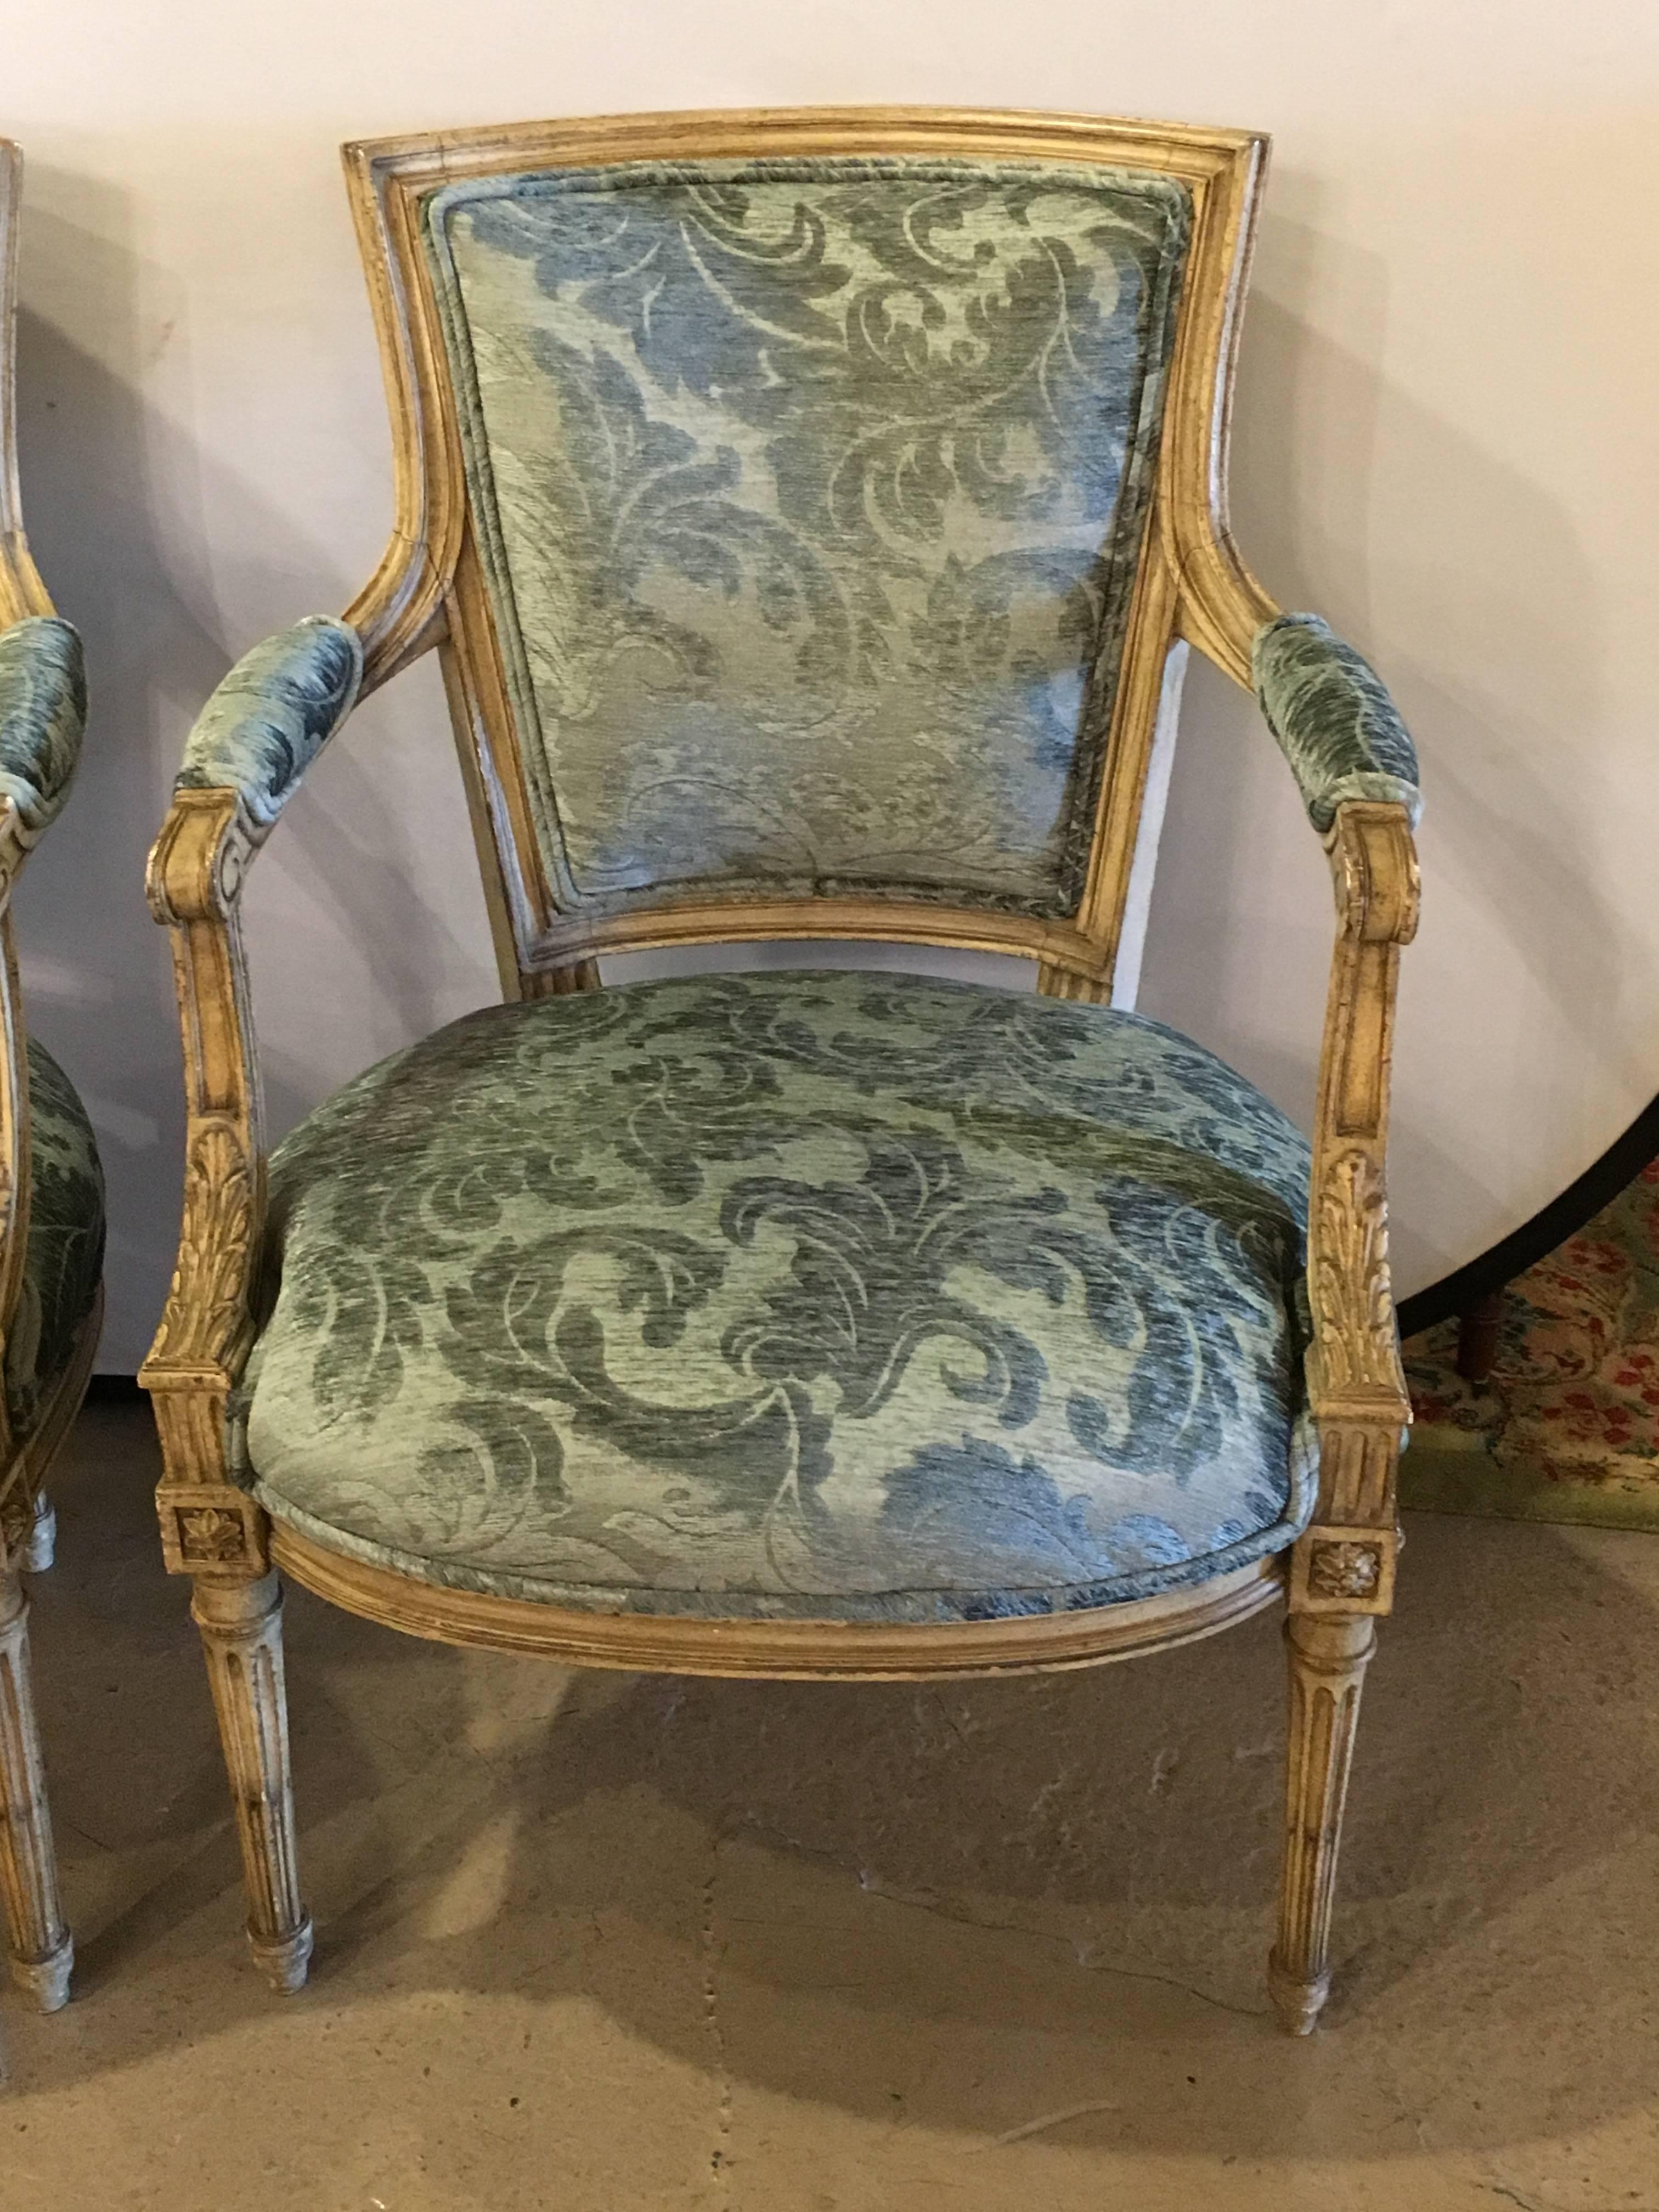 Pair of Maison Jansen Louis XVI style chairs. Finely carved and newly upholstered. The highly distressed frames are a fine depiction of the Hollywood Regency glamour that came to form in the 1940s.

This piece is accompanied by a letter of